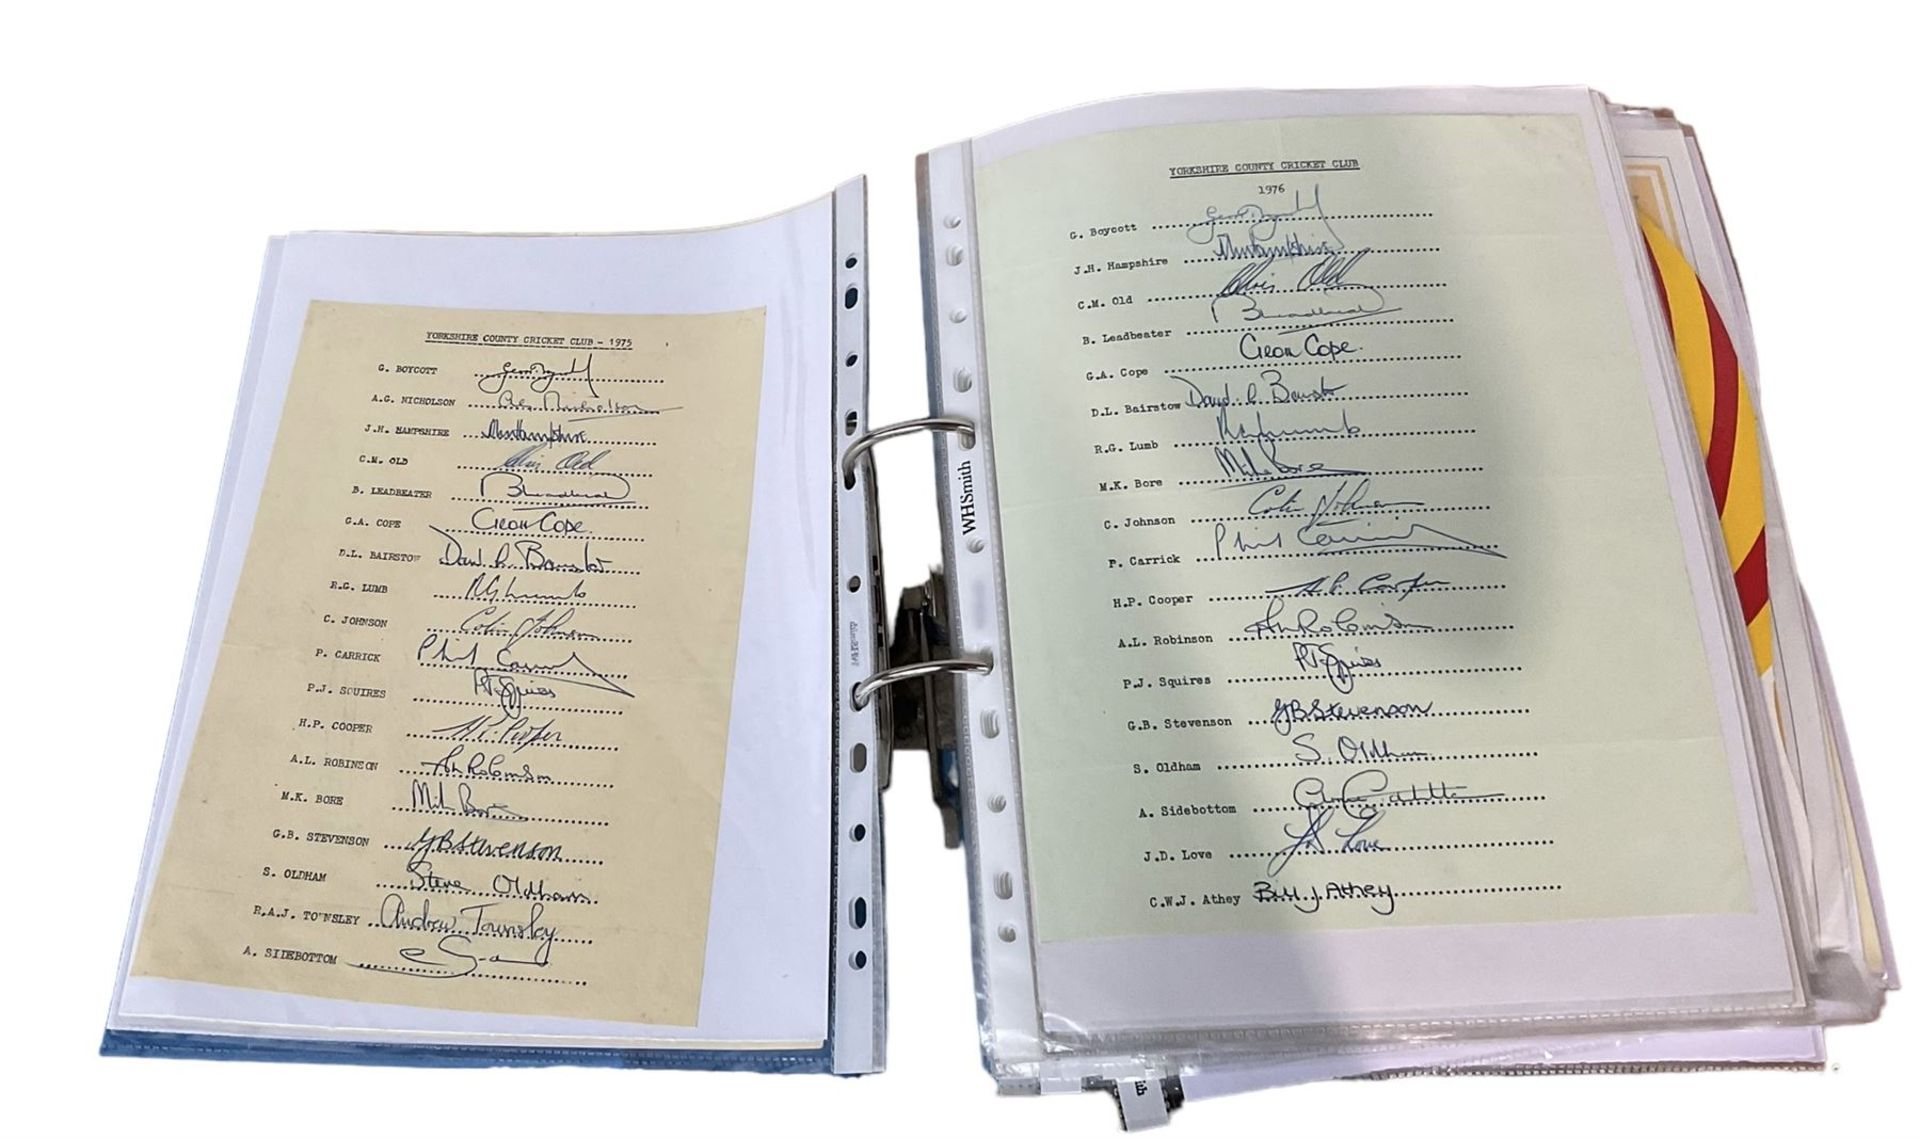 Yorkshire Cricket - various autographs and signatures including Geoffrey Boycott